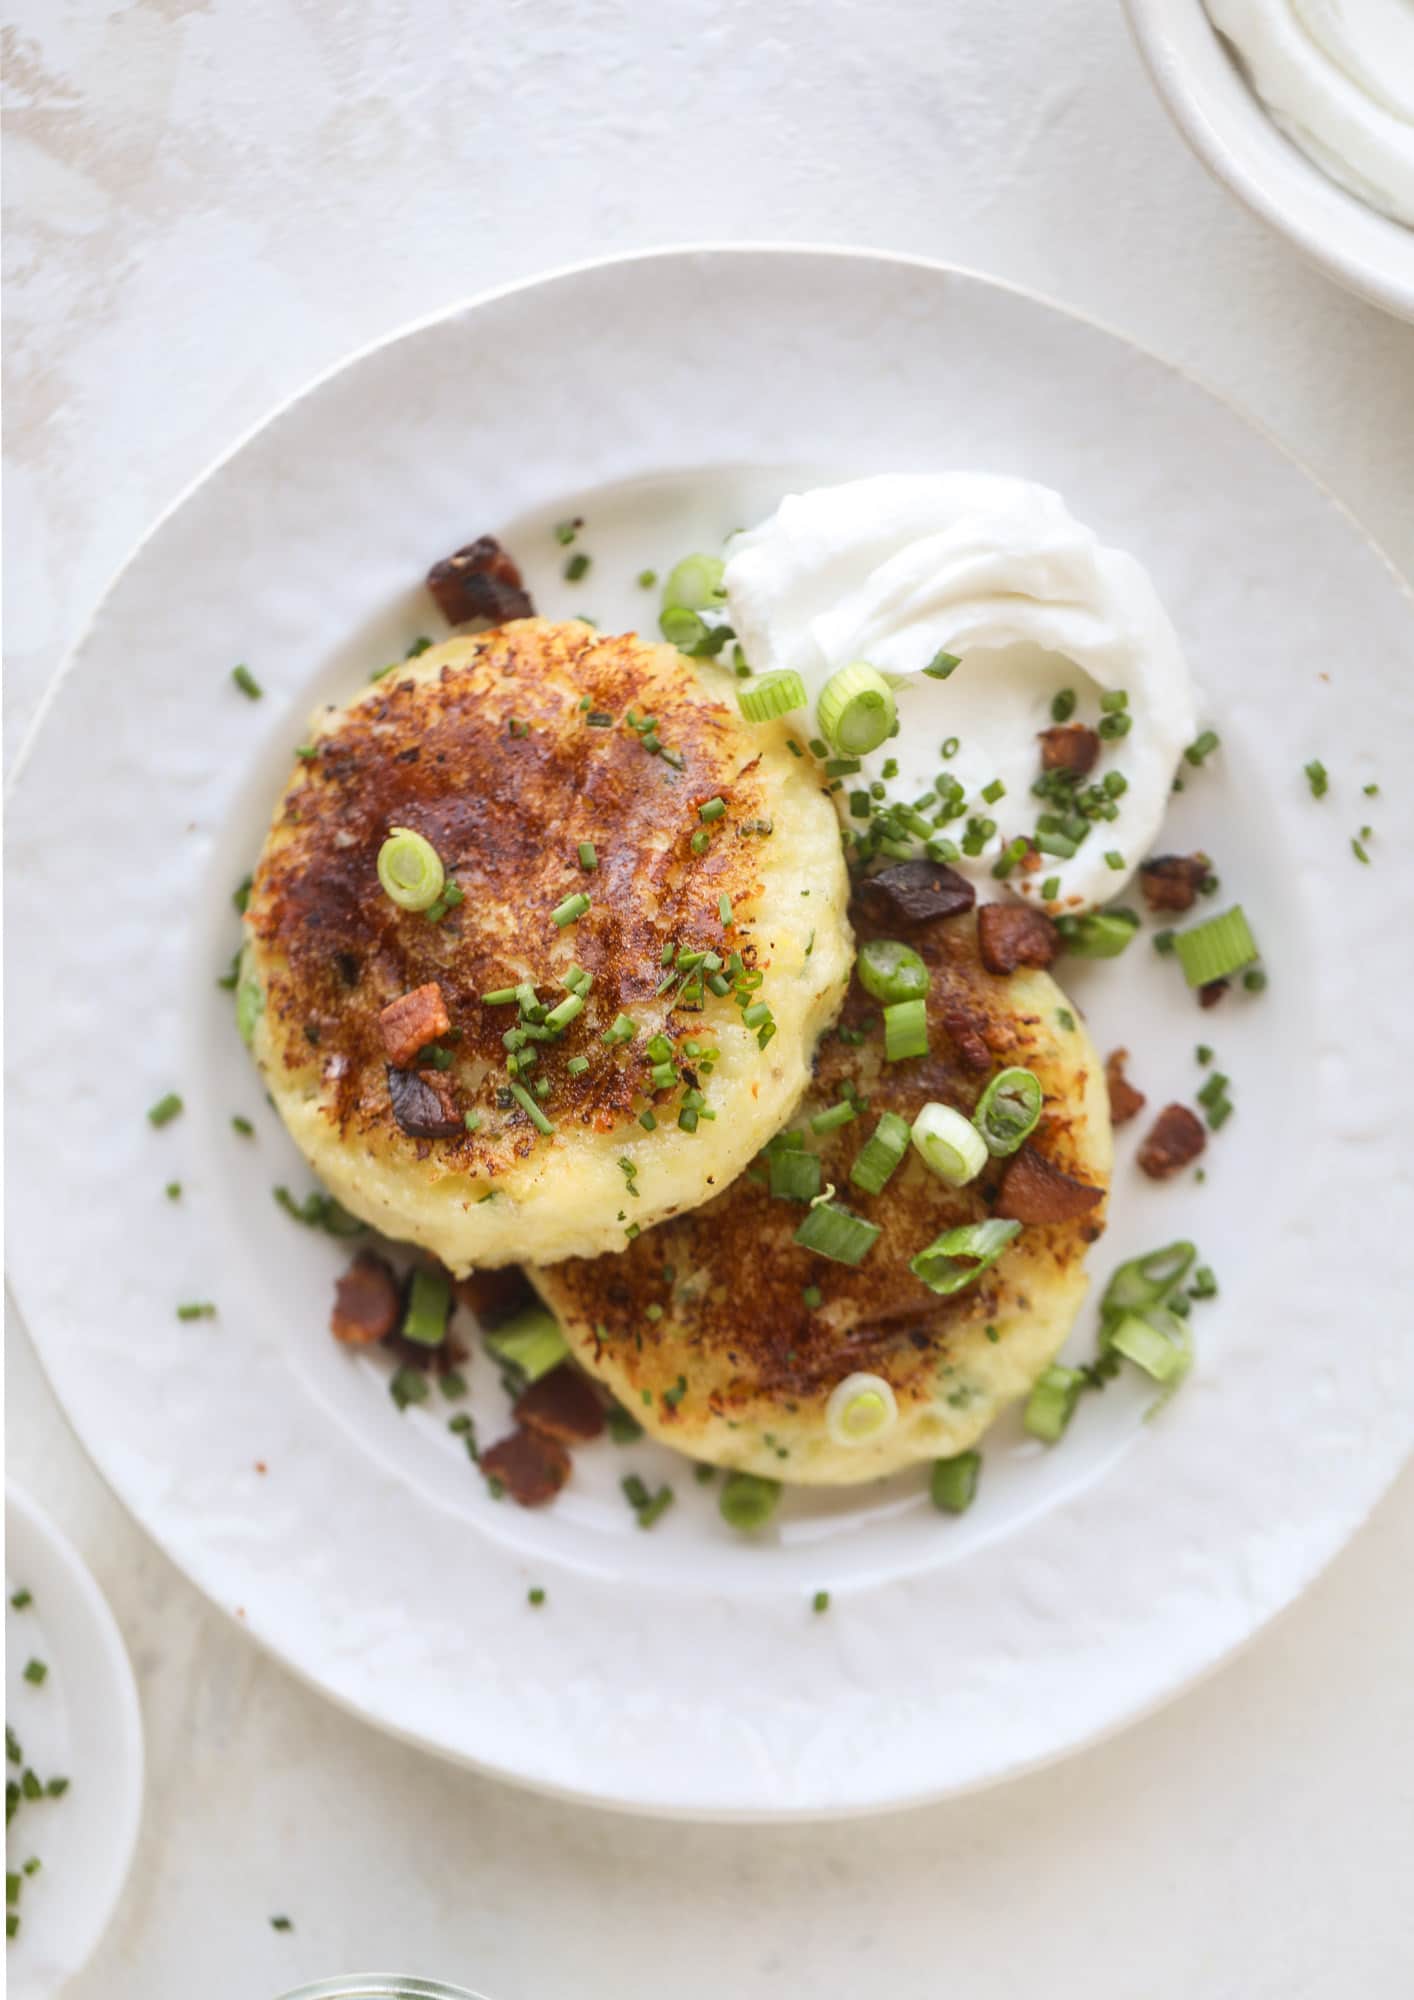 Loaded mashed potato pancakes are the perfect comfort food or side dish to a hearty meat. Crispy mashed potatoes with aged cheddar. Delicious! I howsweeteats.com #mashedpotato #pancakes